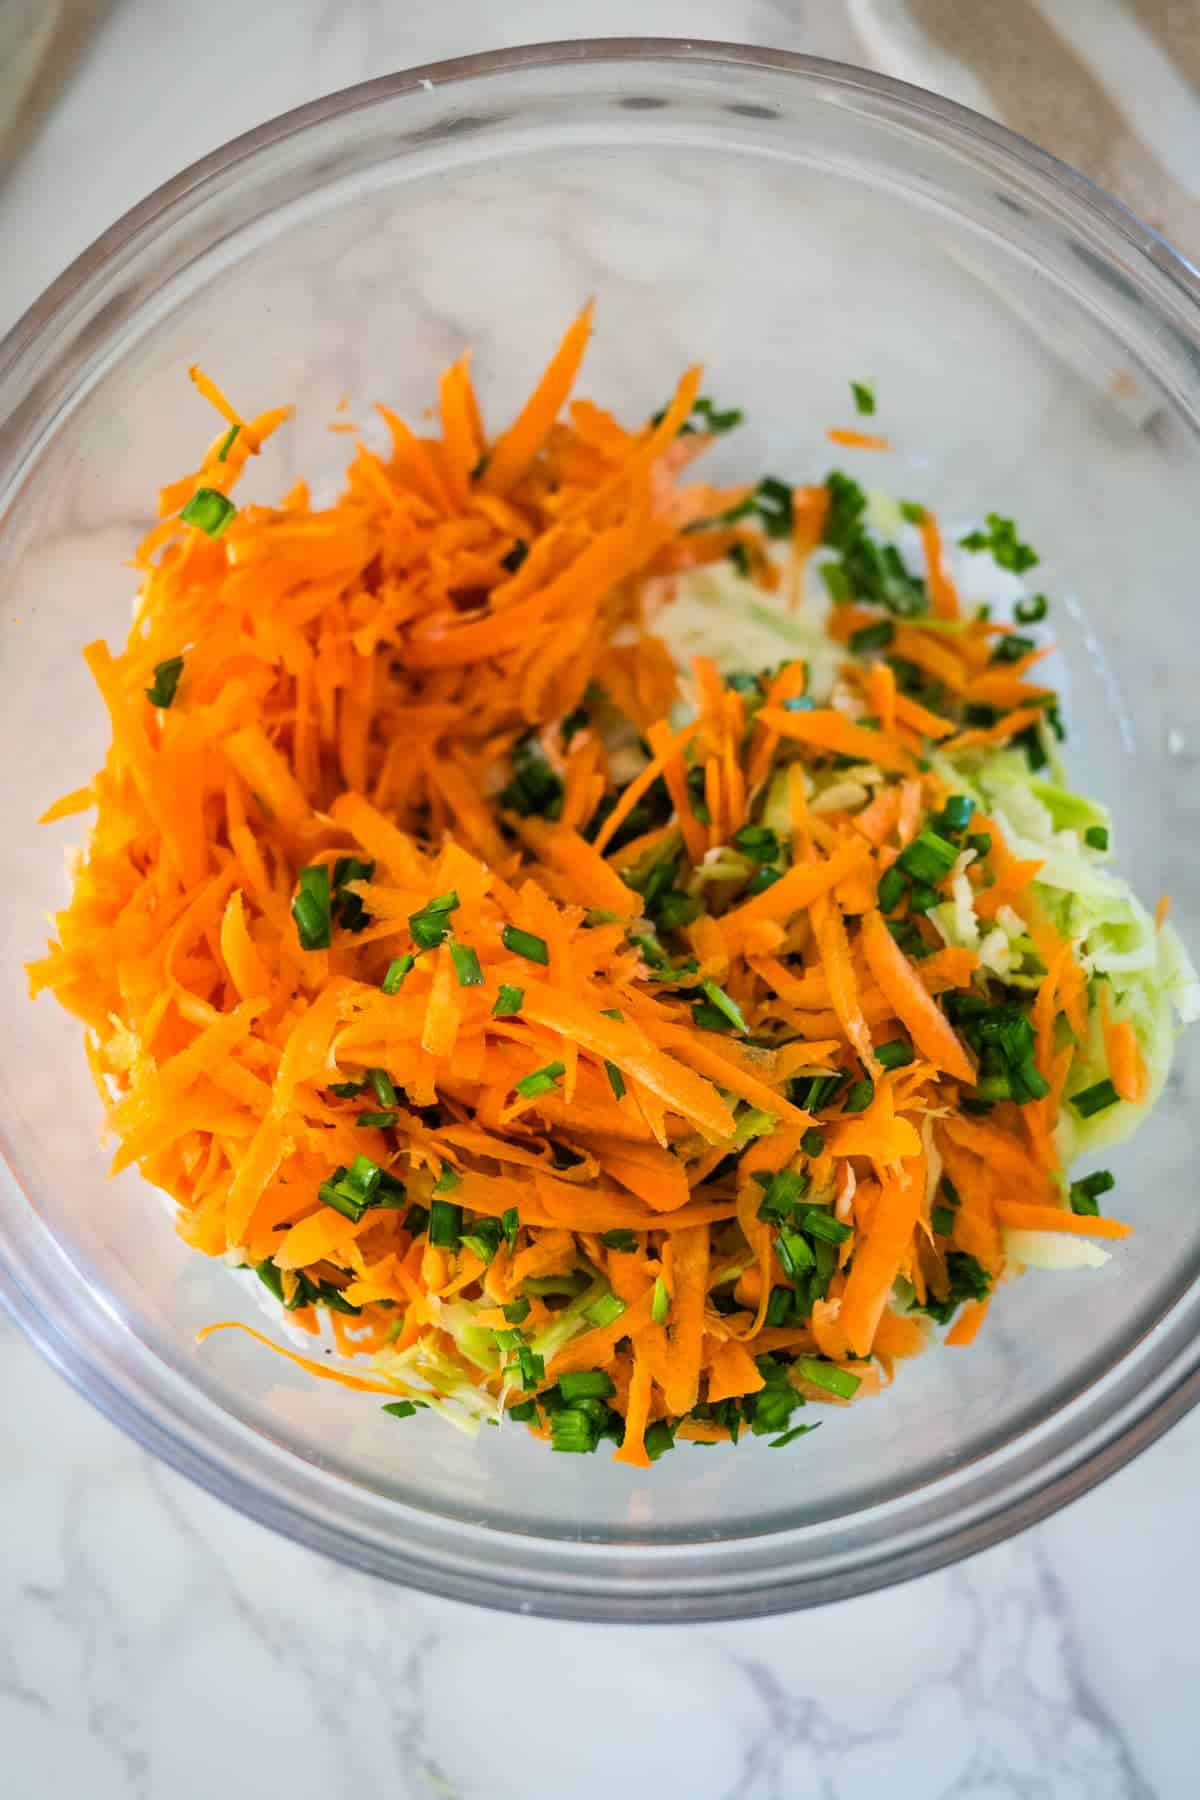 Shredded broccoli coleslaw and parsley in a bowl.